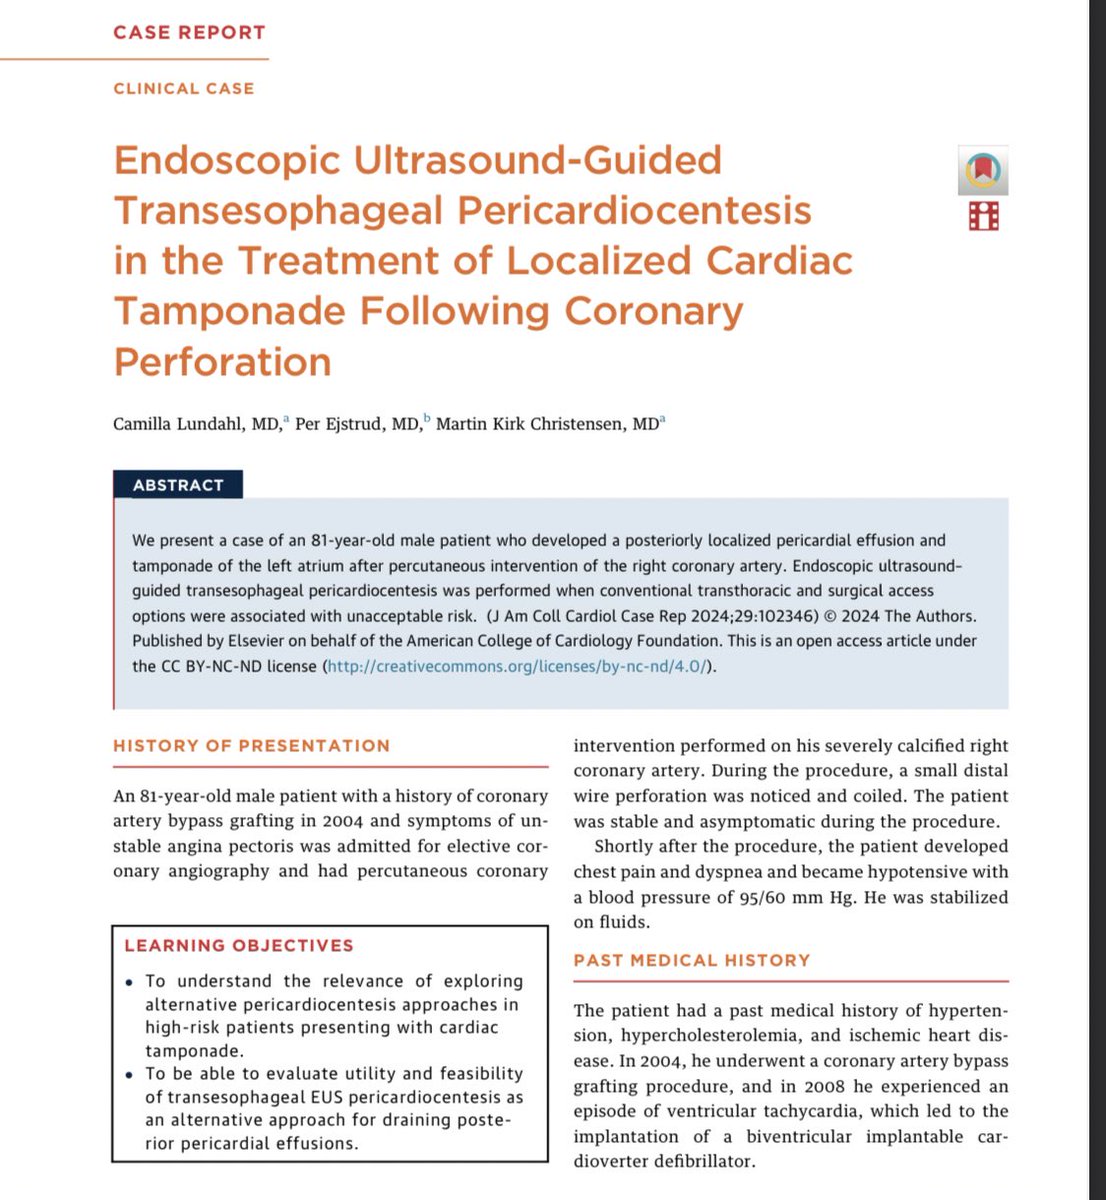 Out in @JACCJournals #casereports: 

Endoscopic Ultrasound-Guided Transesophageal Pericardiocentesis in the Treatment of Localized Cardiac Tamponade Following Coronary Perforation @AalborgUH 

sciencedirect.com/science/articl…